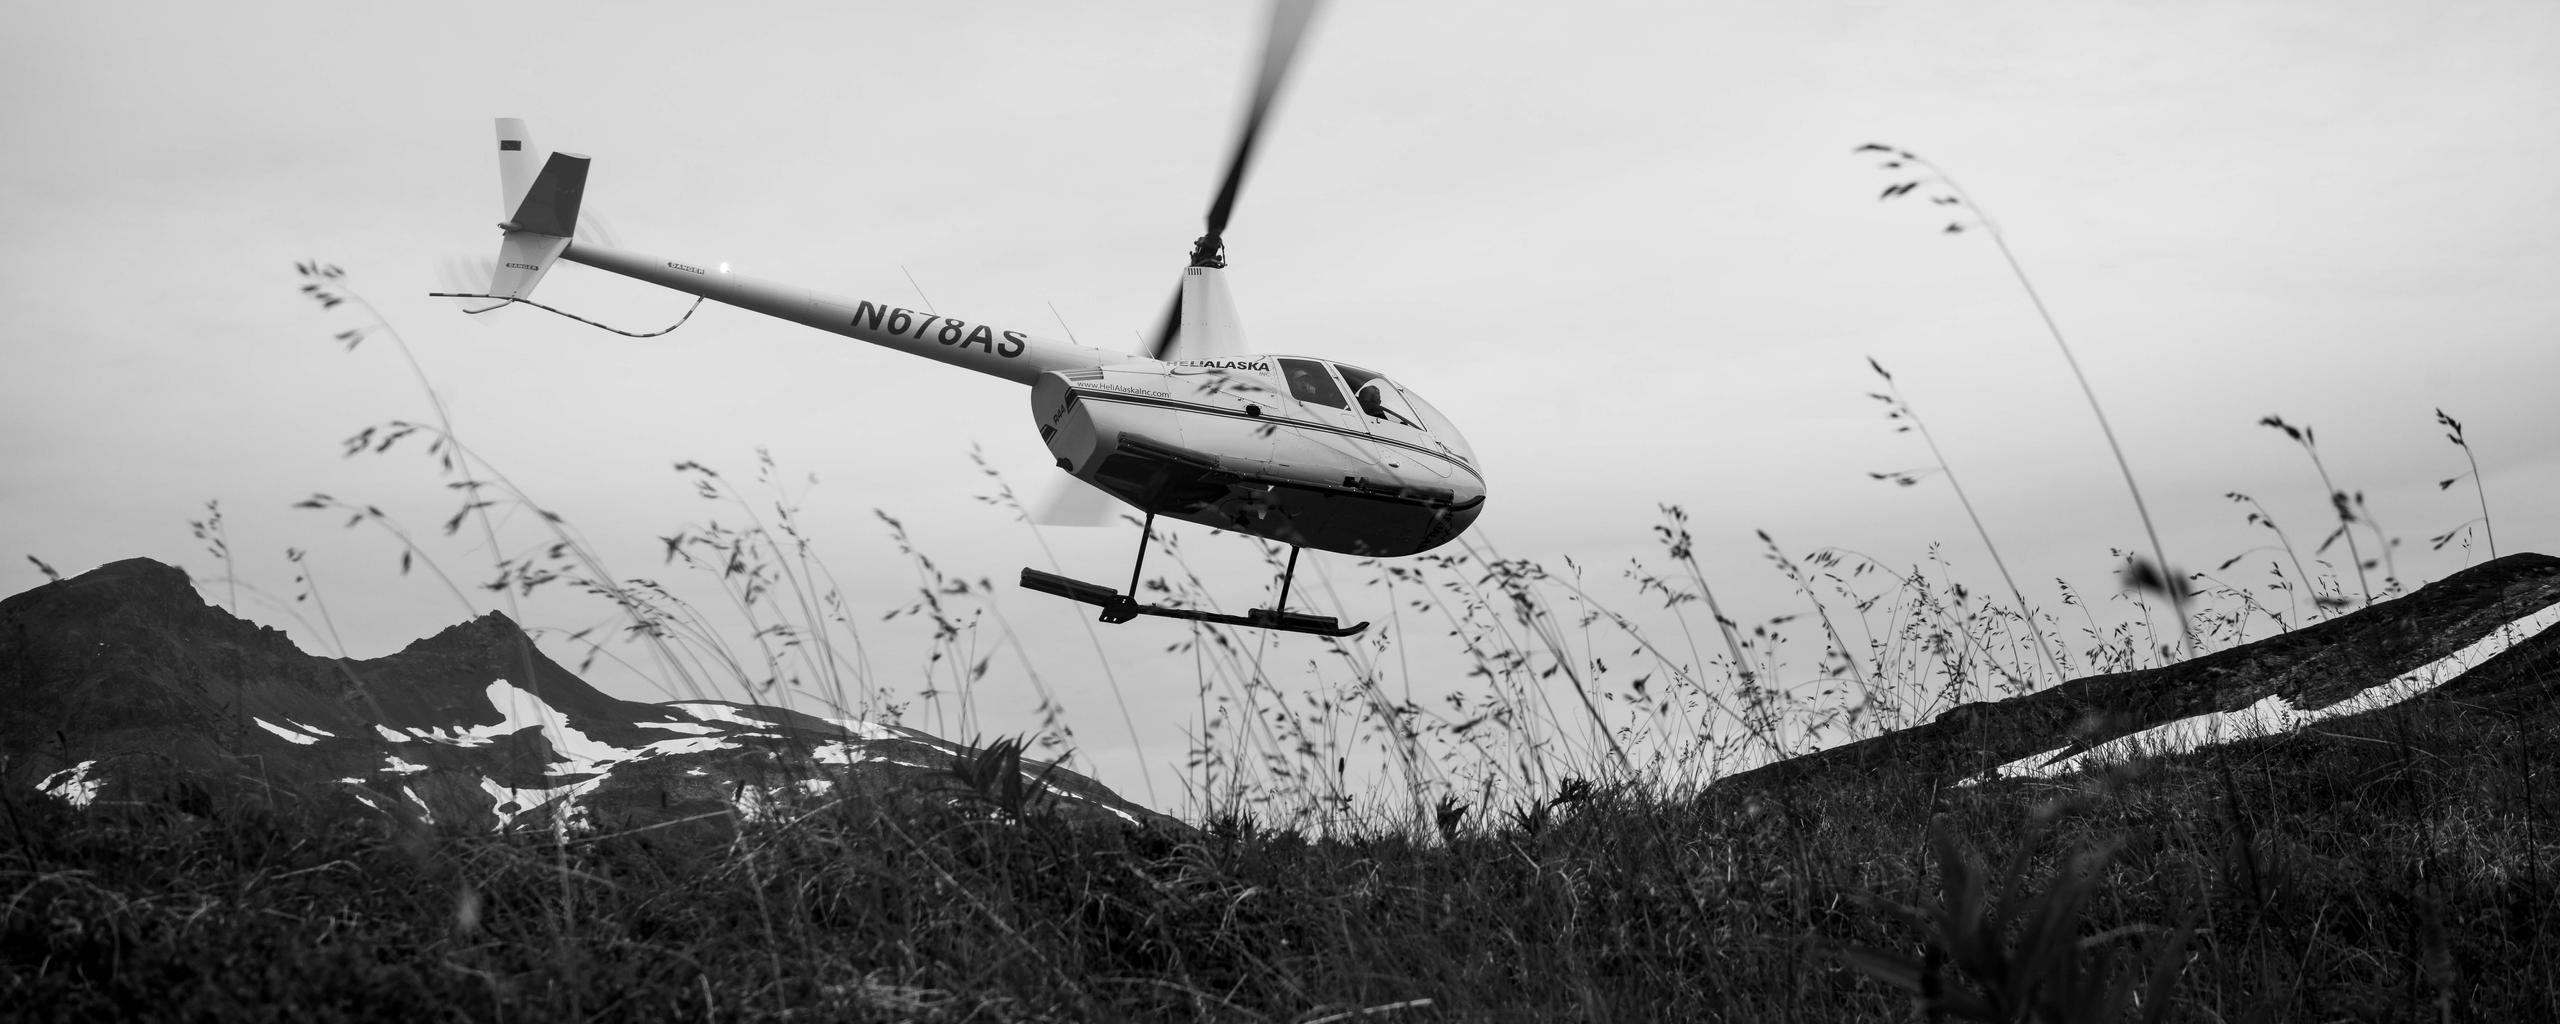 Black and white photograph of helicopter taking off from Alaskan highlands